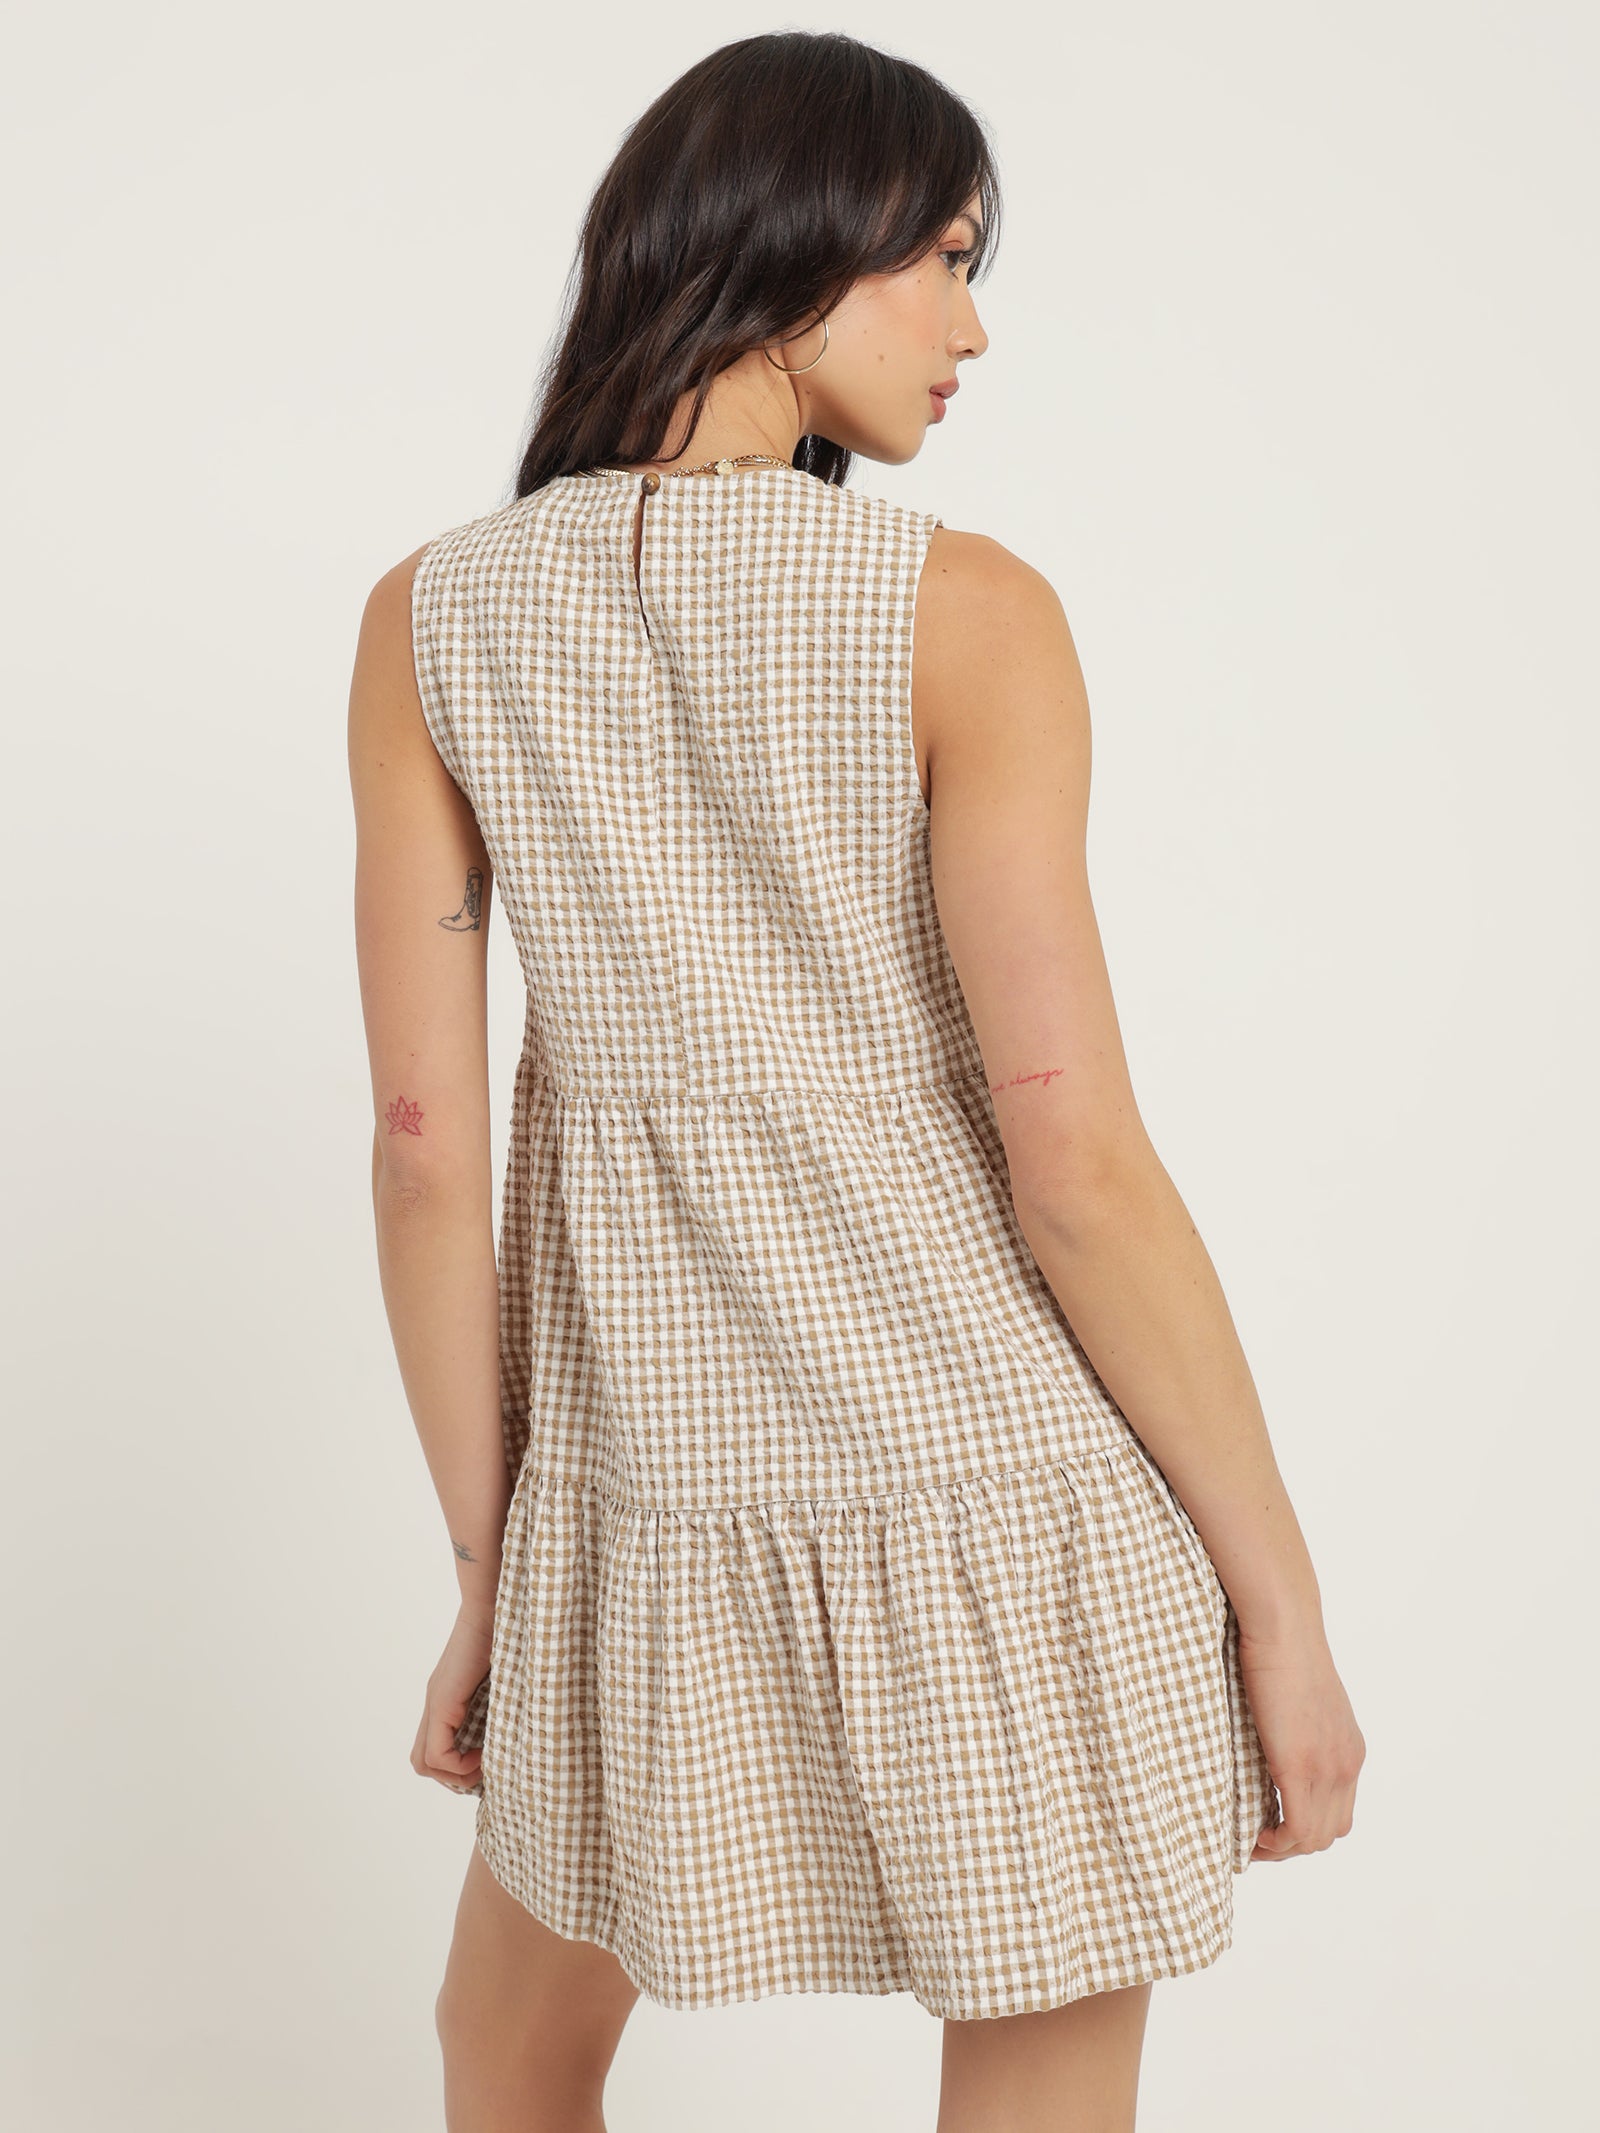 Sutton Tired Dress in Gingham